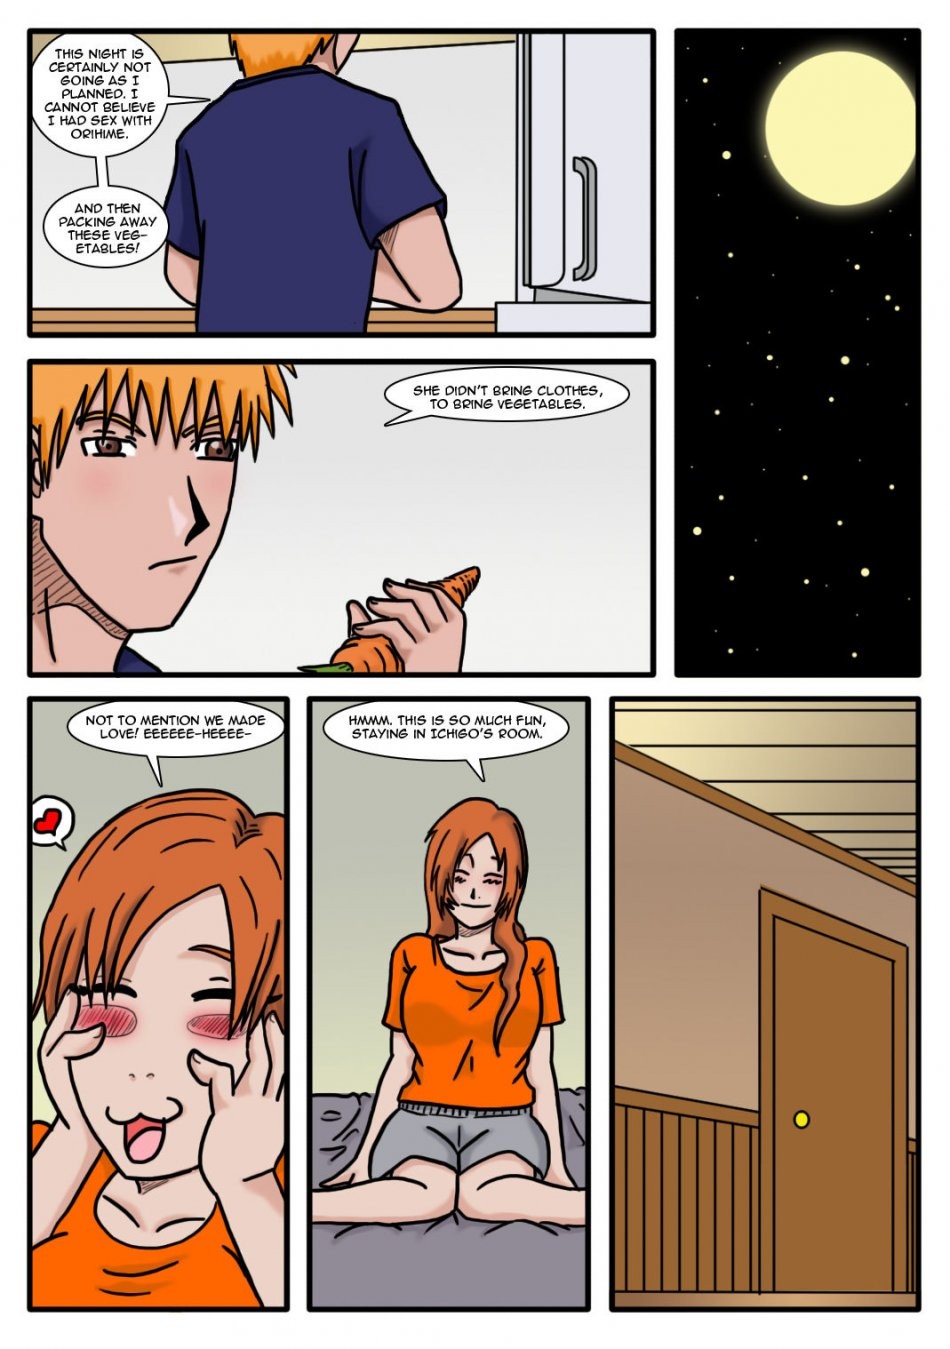 IchiHime - Second Night porn comic picture 1